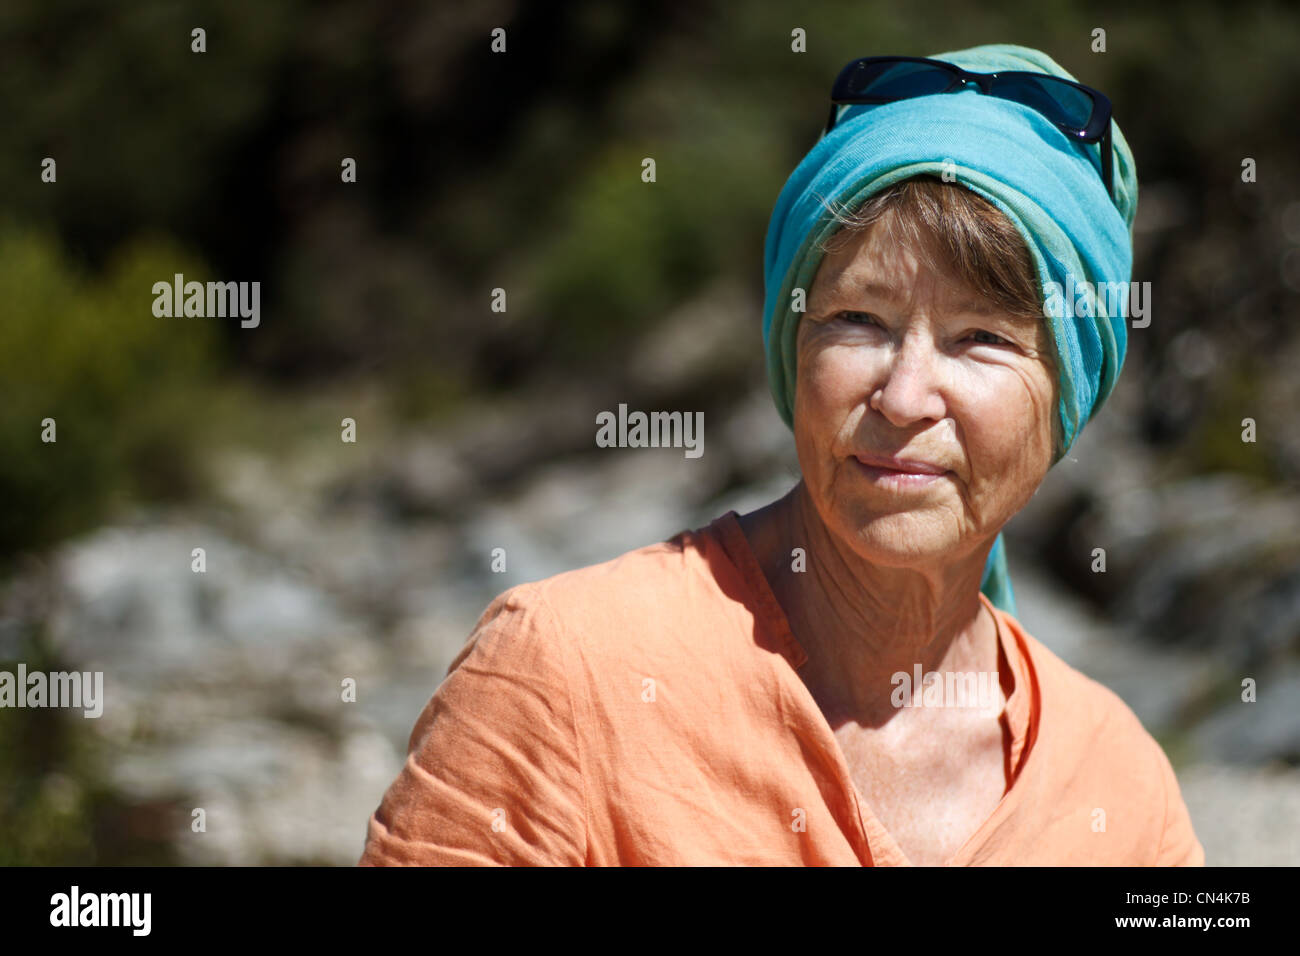 Senior woman wearing headscarf and smiling, outdoors. Stock Photo